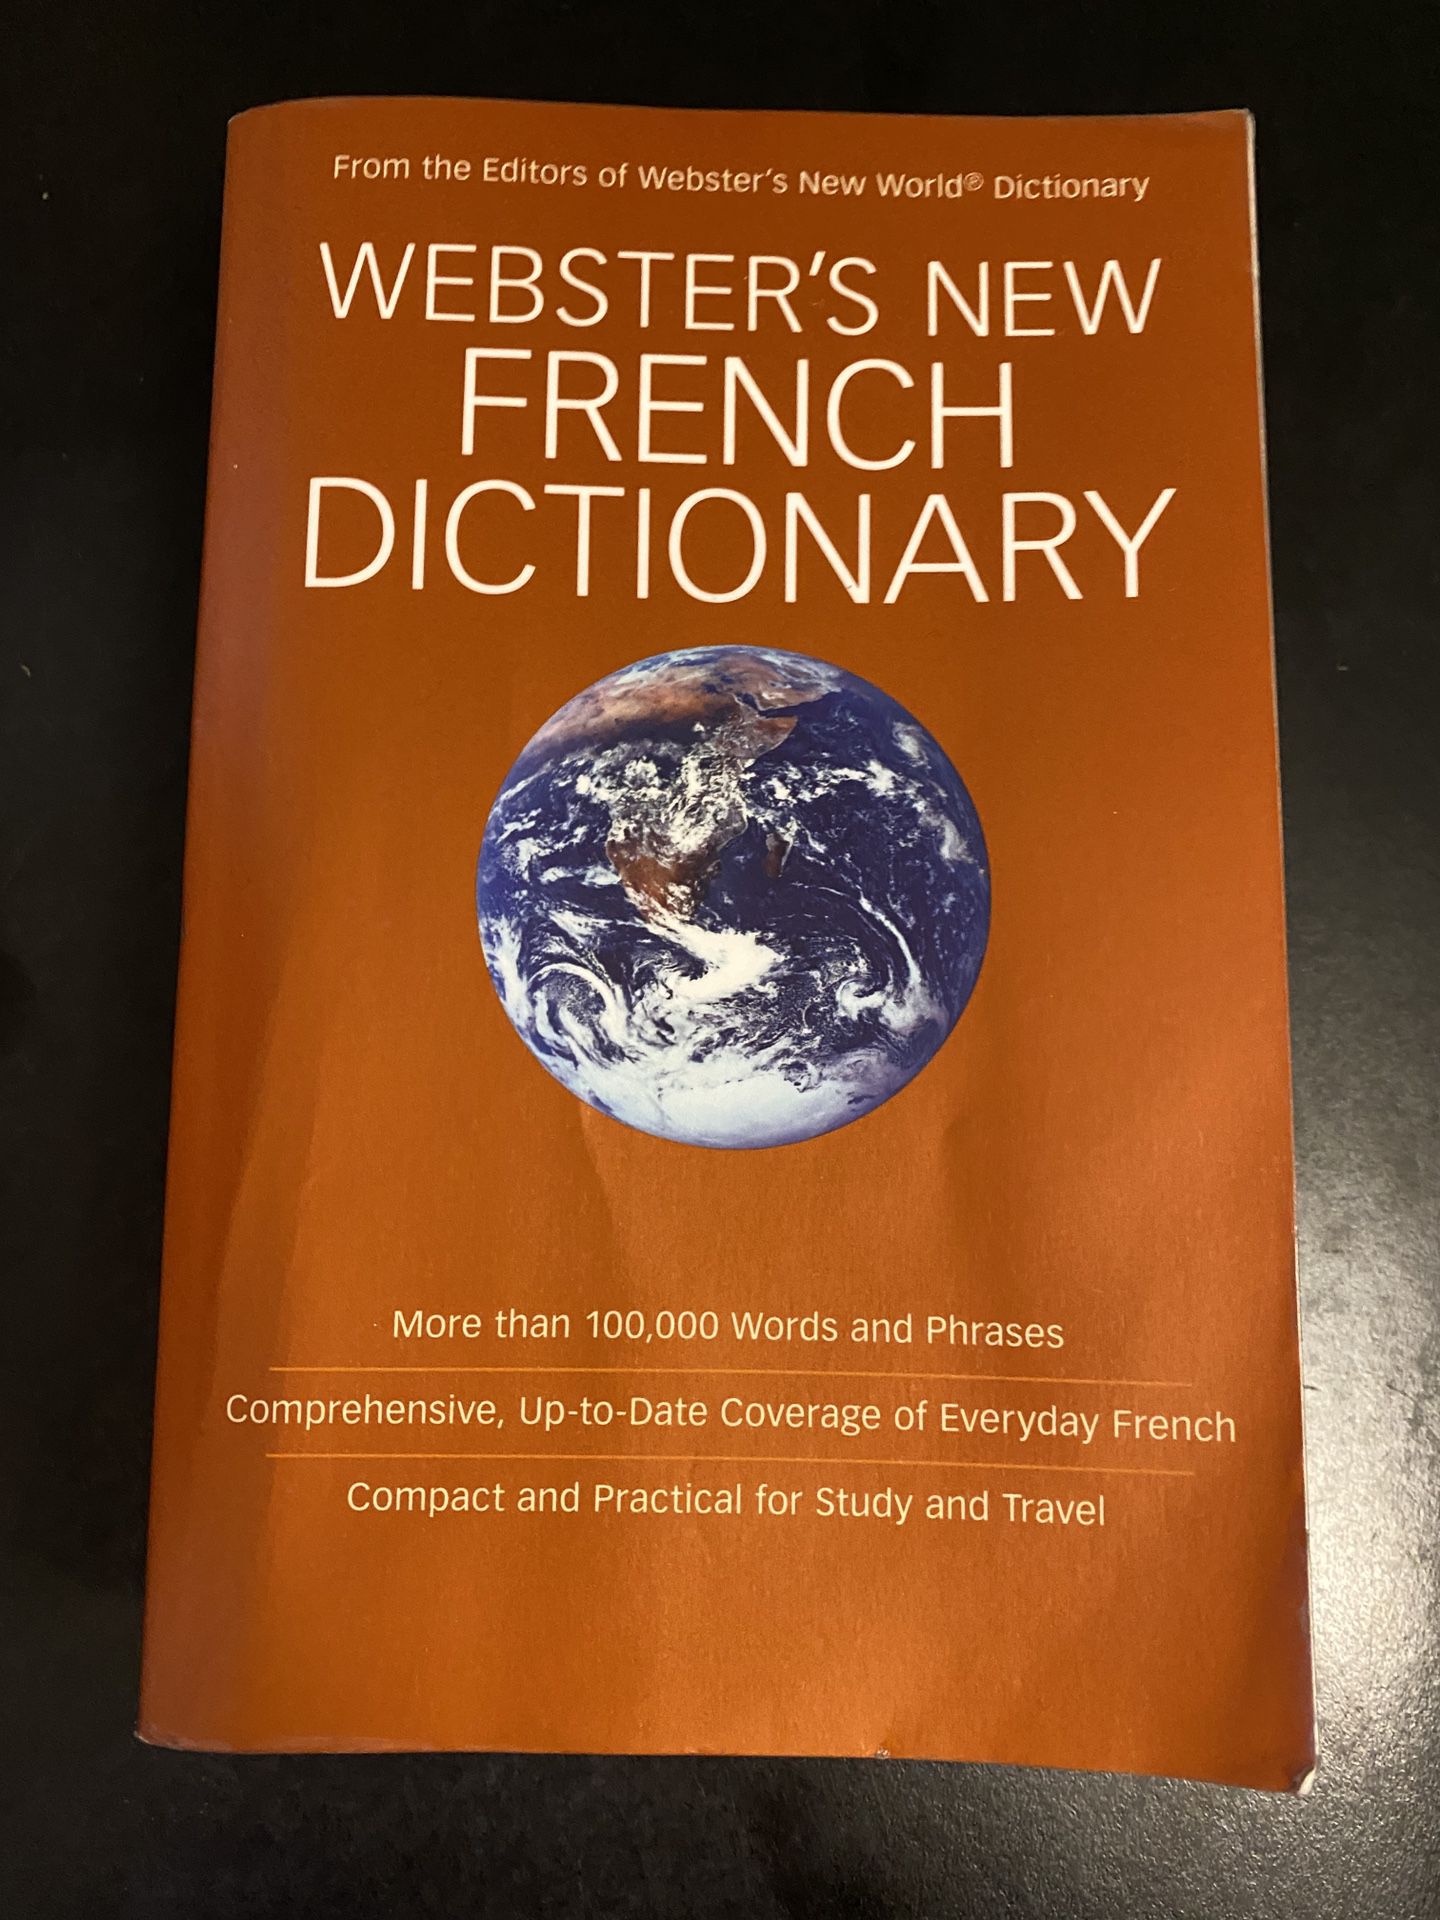 Webster’s New French Dictionary